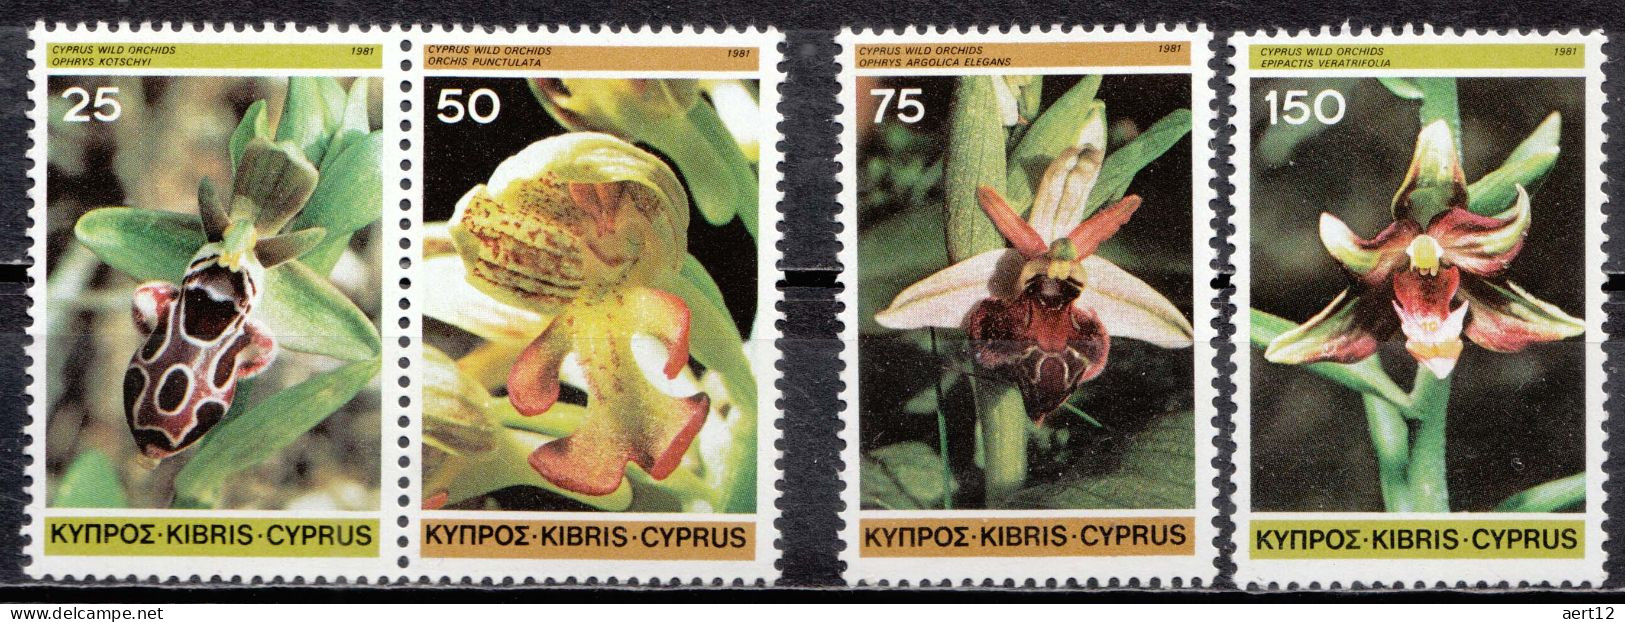 1981, Cyprus, Wild Orchids, Flowers, Orchids, Plants, 4 Stamps, MNH(**), CY 552-55 - Neufs